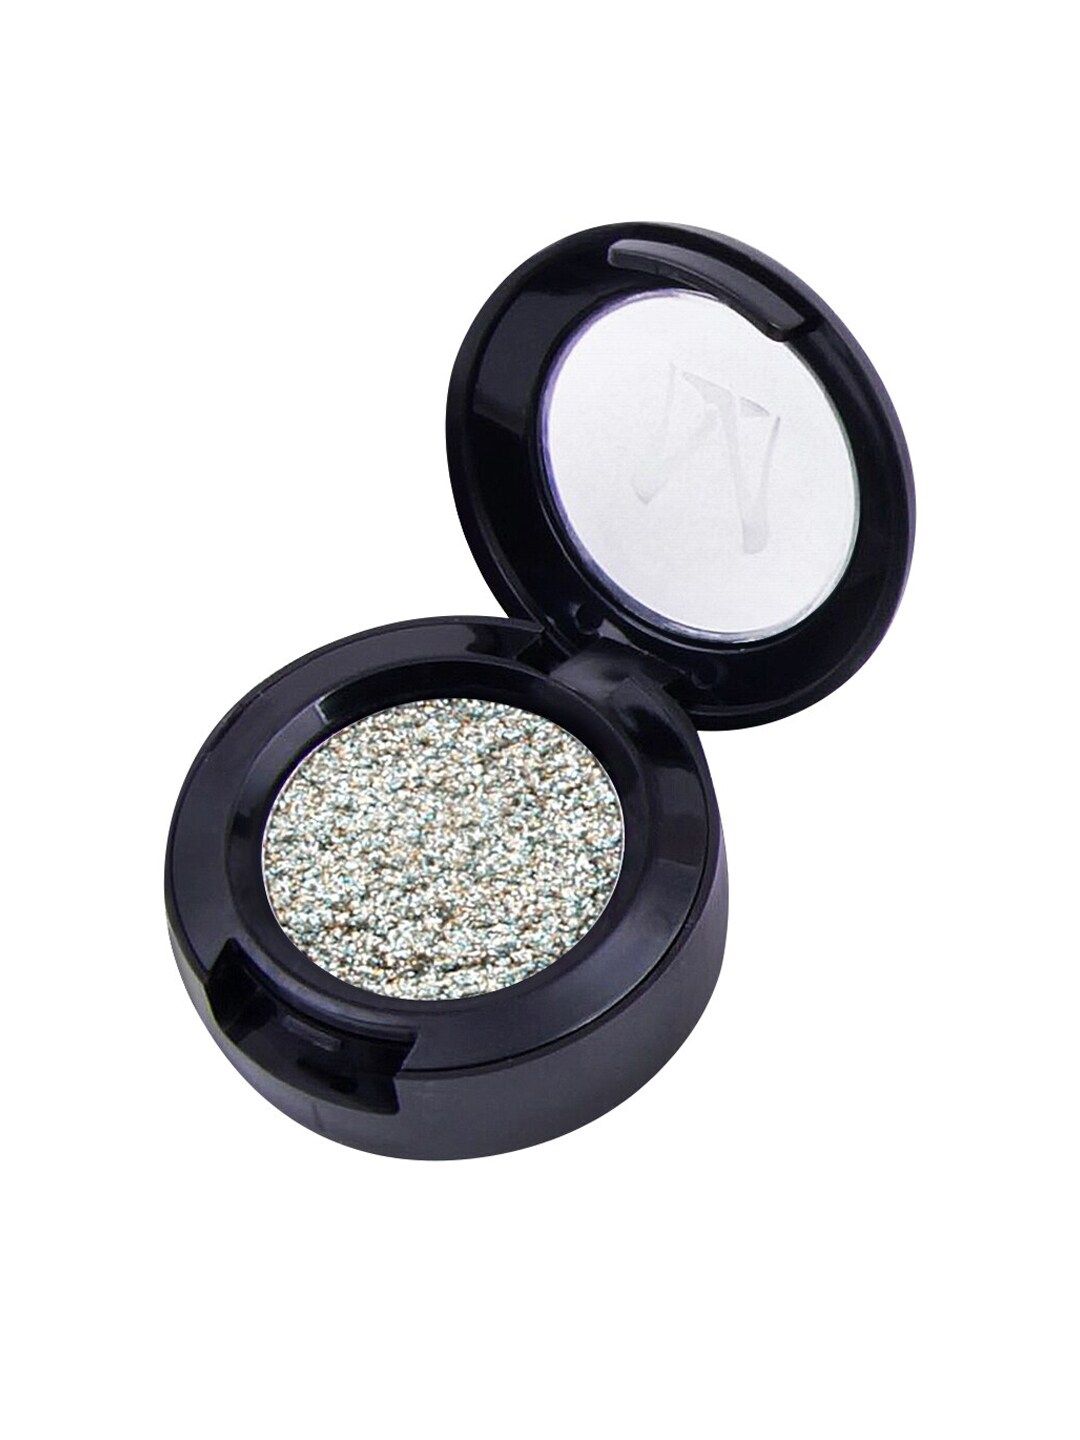 Misss Rose Single Color Eyeshadow Shining Glitter Glow Pigment Gary 7001-074 03 Price in India